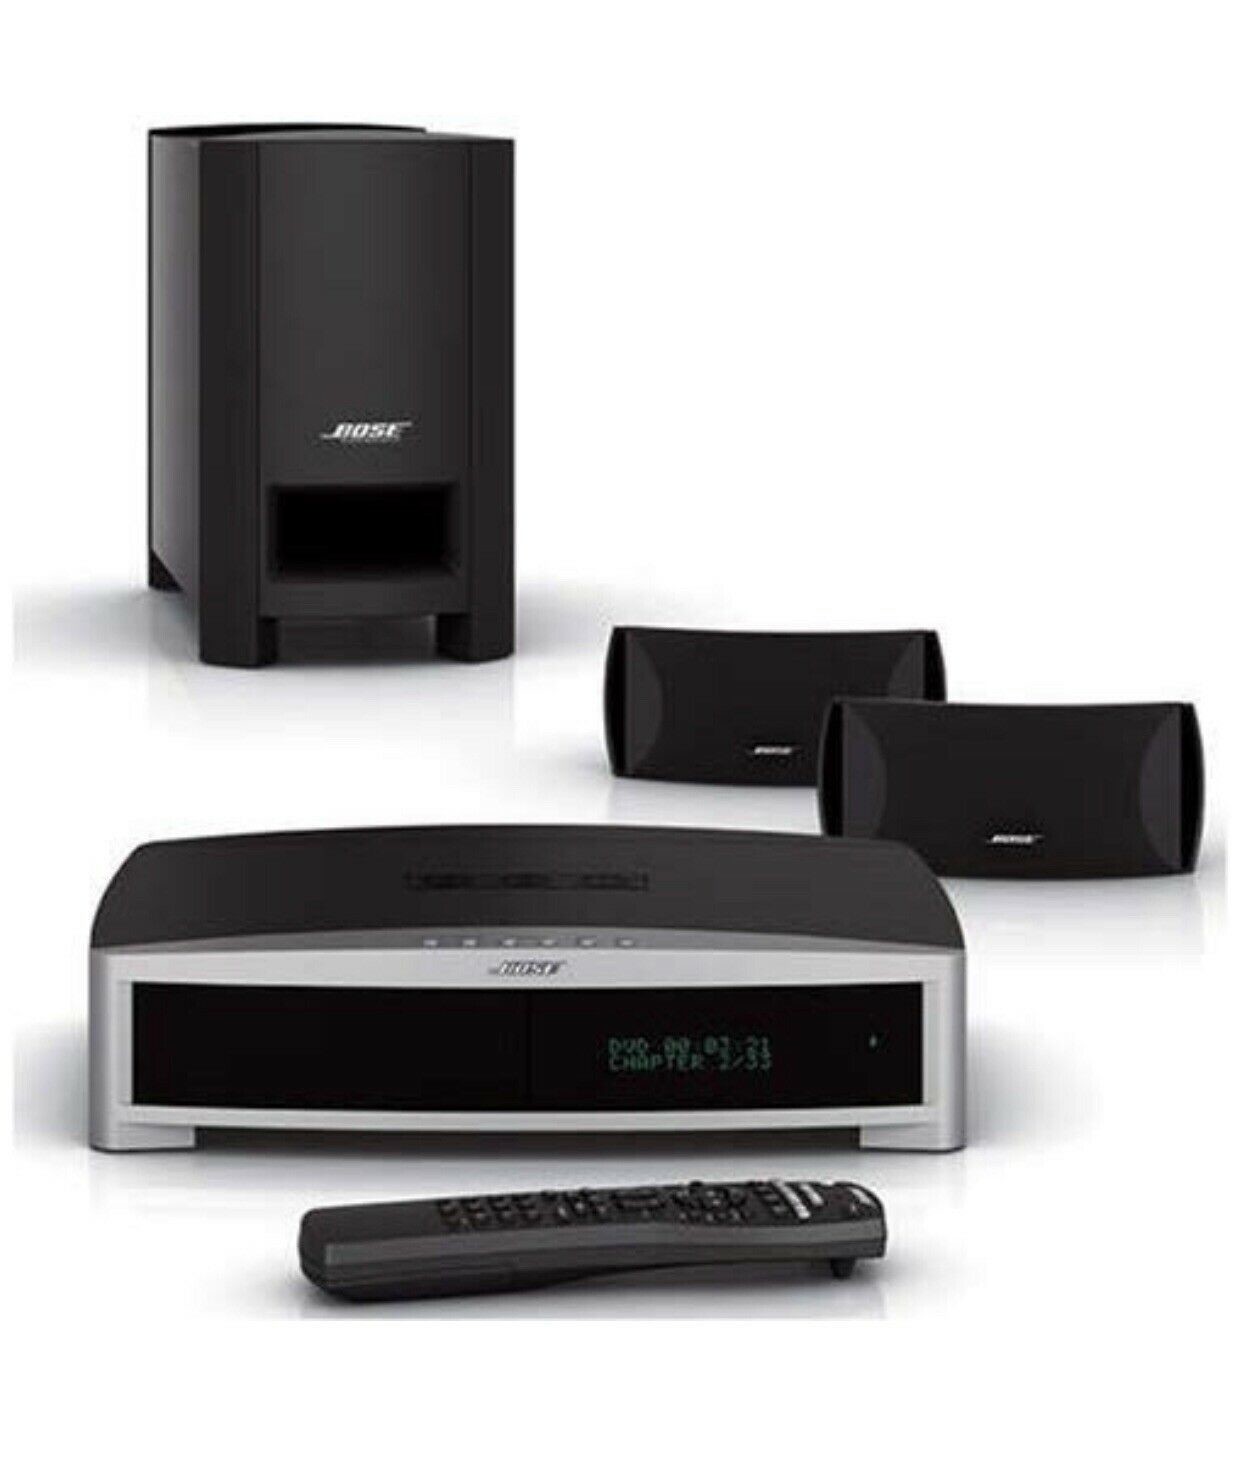 Bose 321 Series II Home Entertainment System